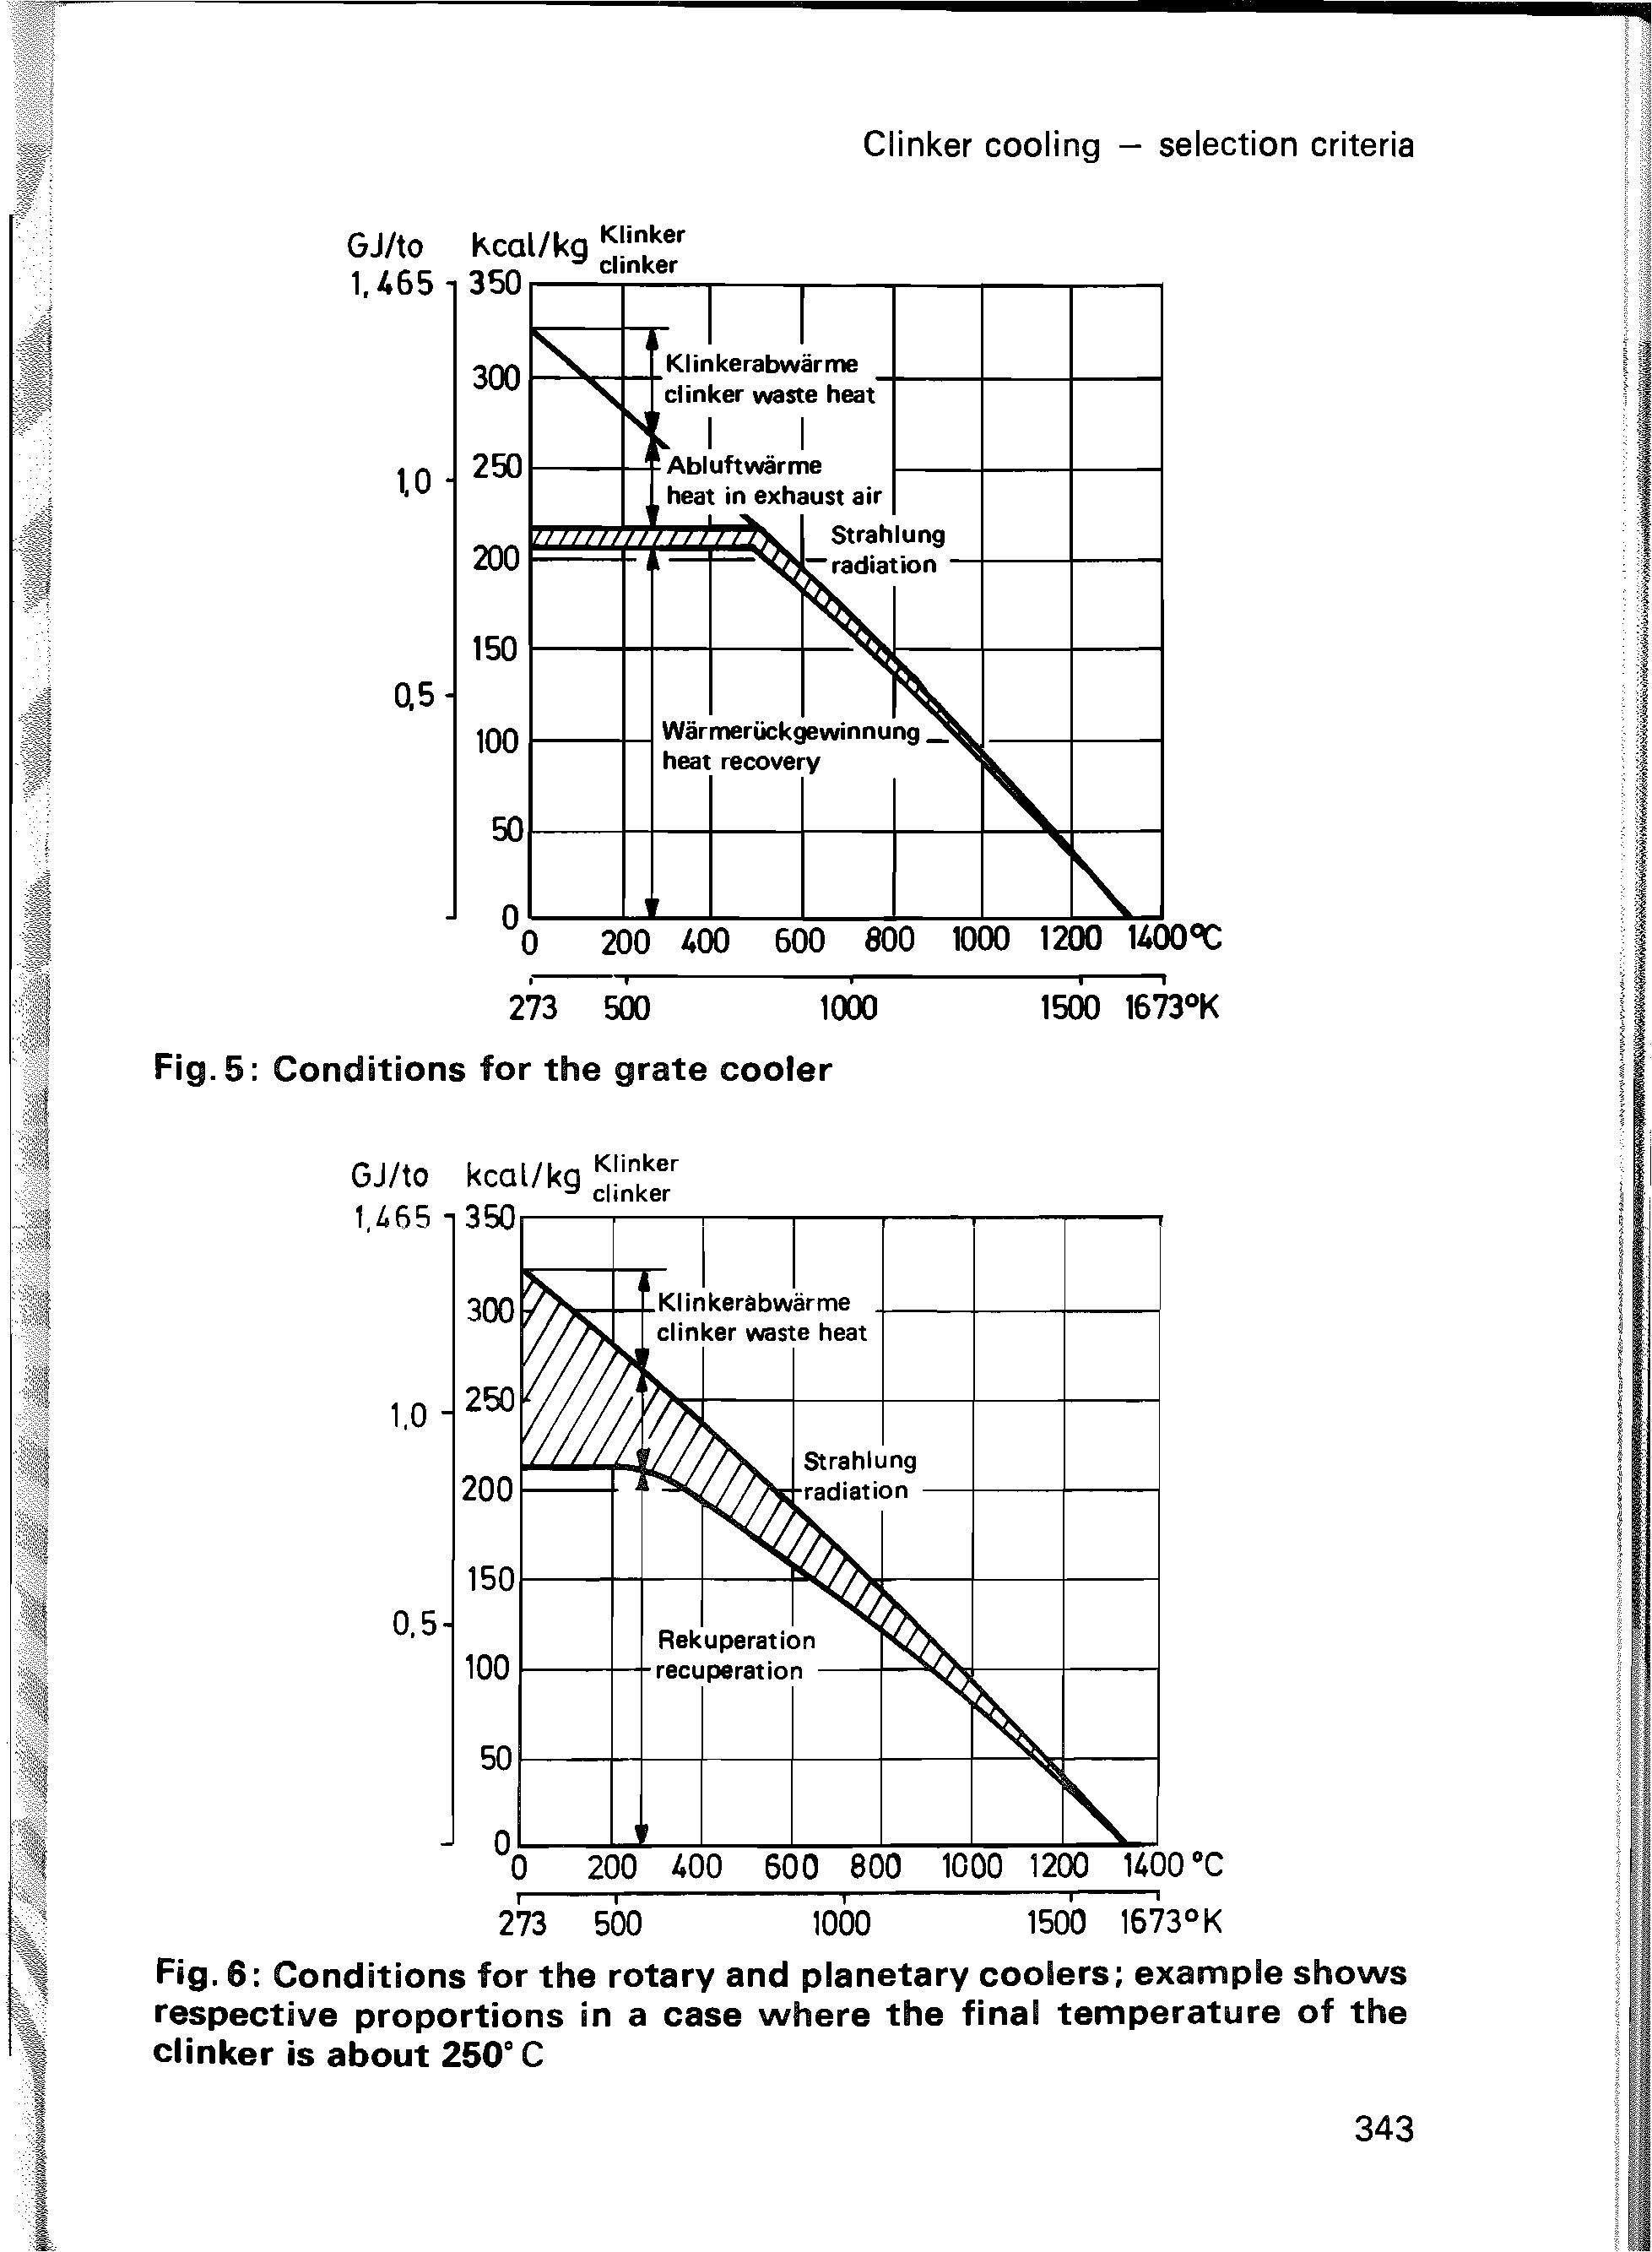 Fig. 6 Conditions for the rotary and planetary coolers example shows respective proportions in a case where the final temperature of the clinker is about 250° C...